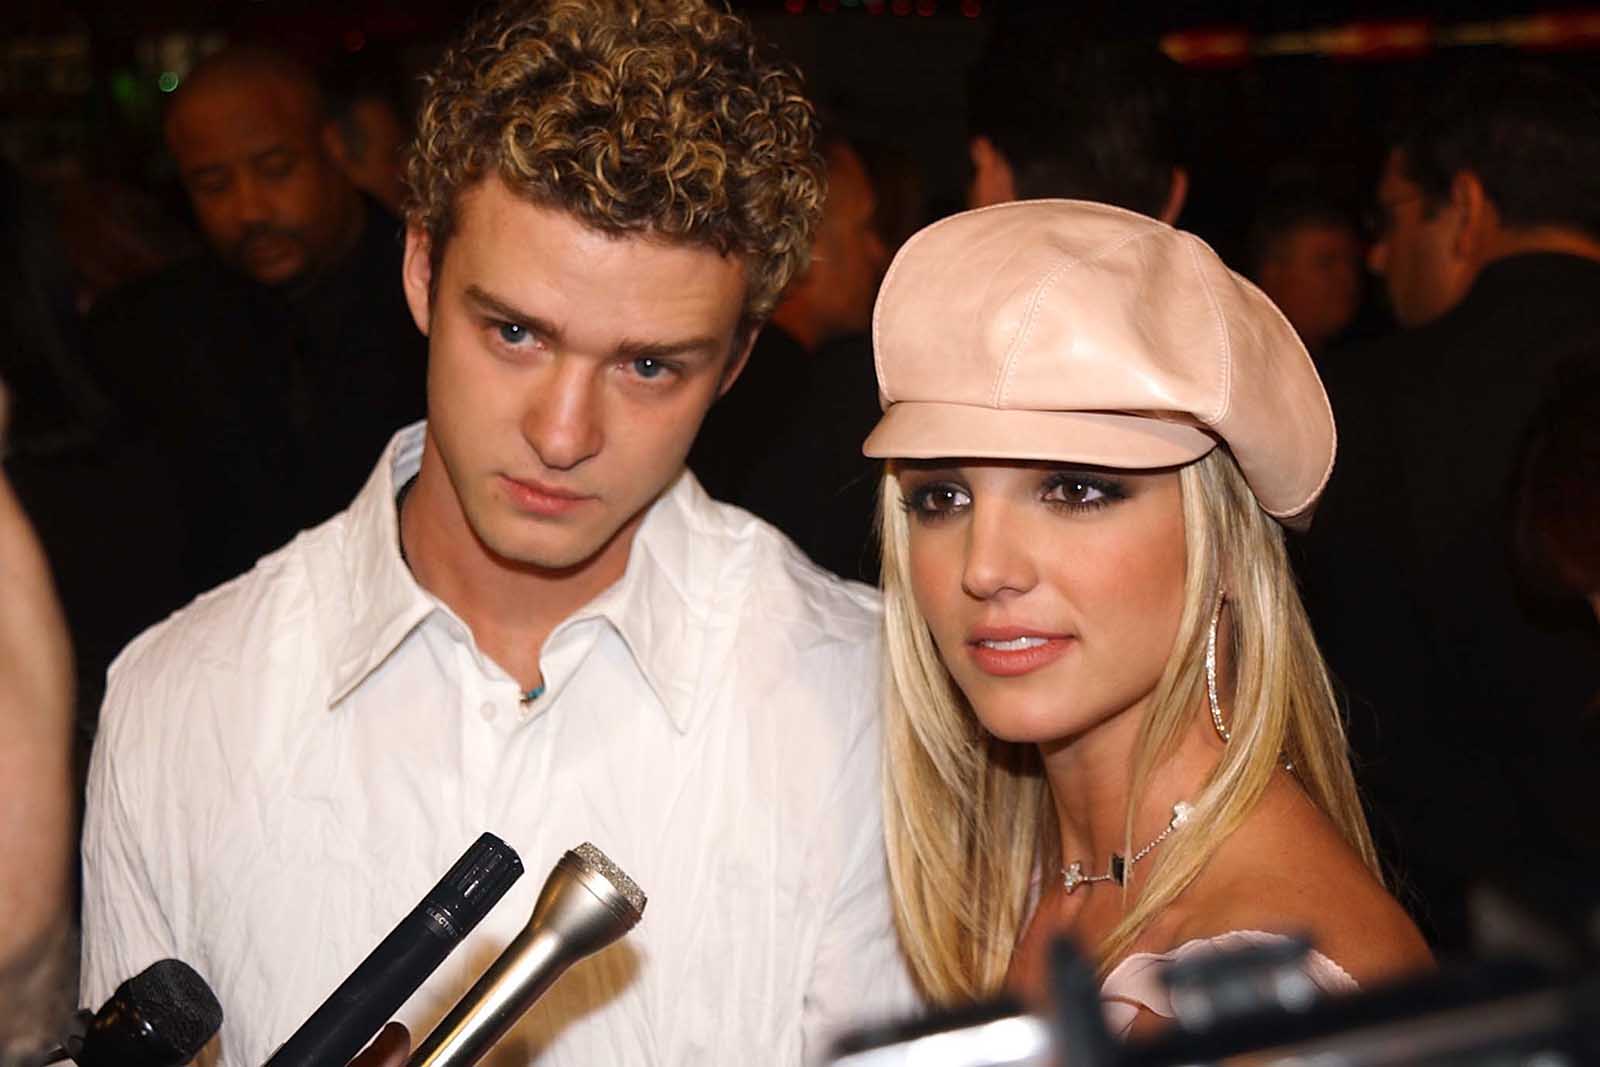 'Framing Britney Spears' has opened people's eyes to the  treatment of the popstar. Now people are asking: did she cheat on Justin Timberlake?